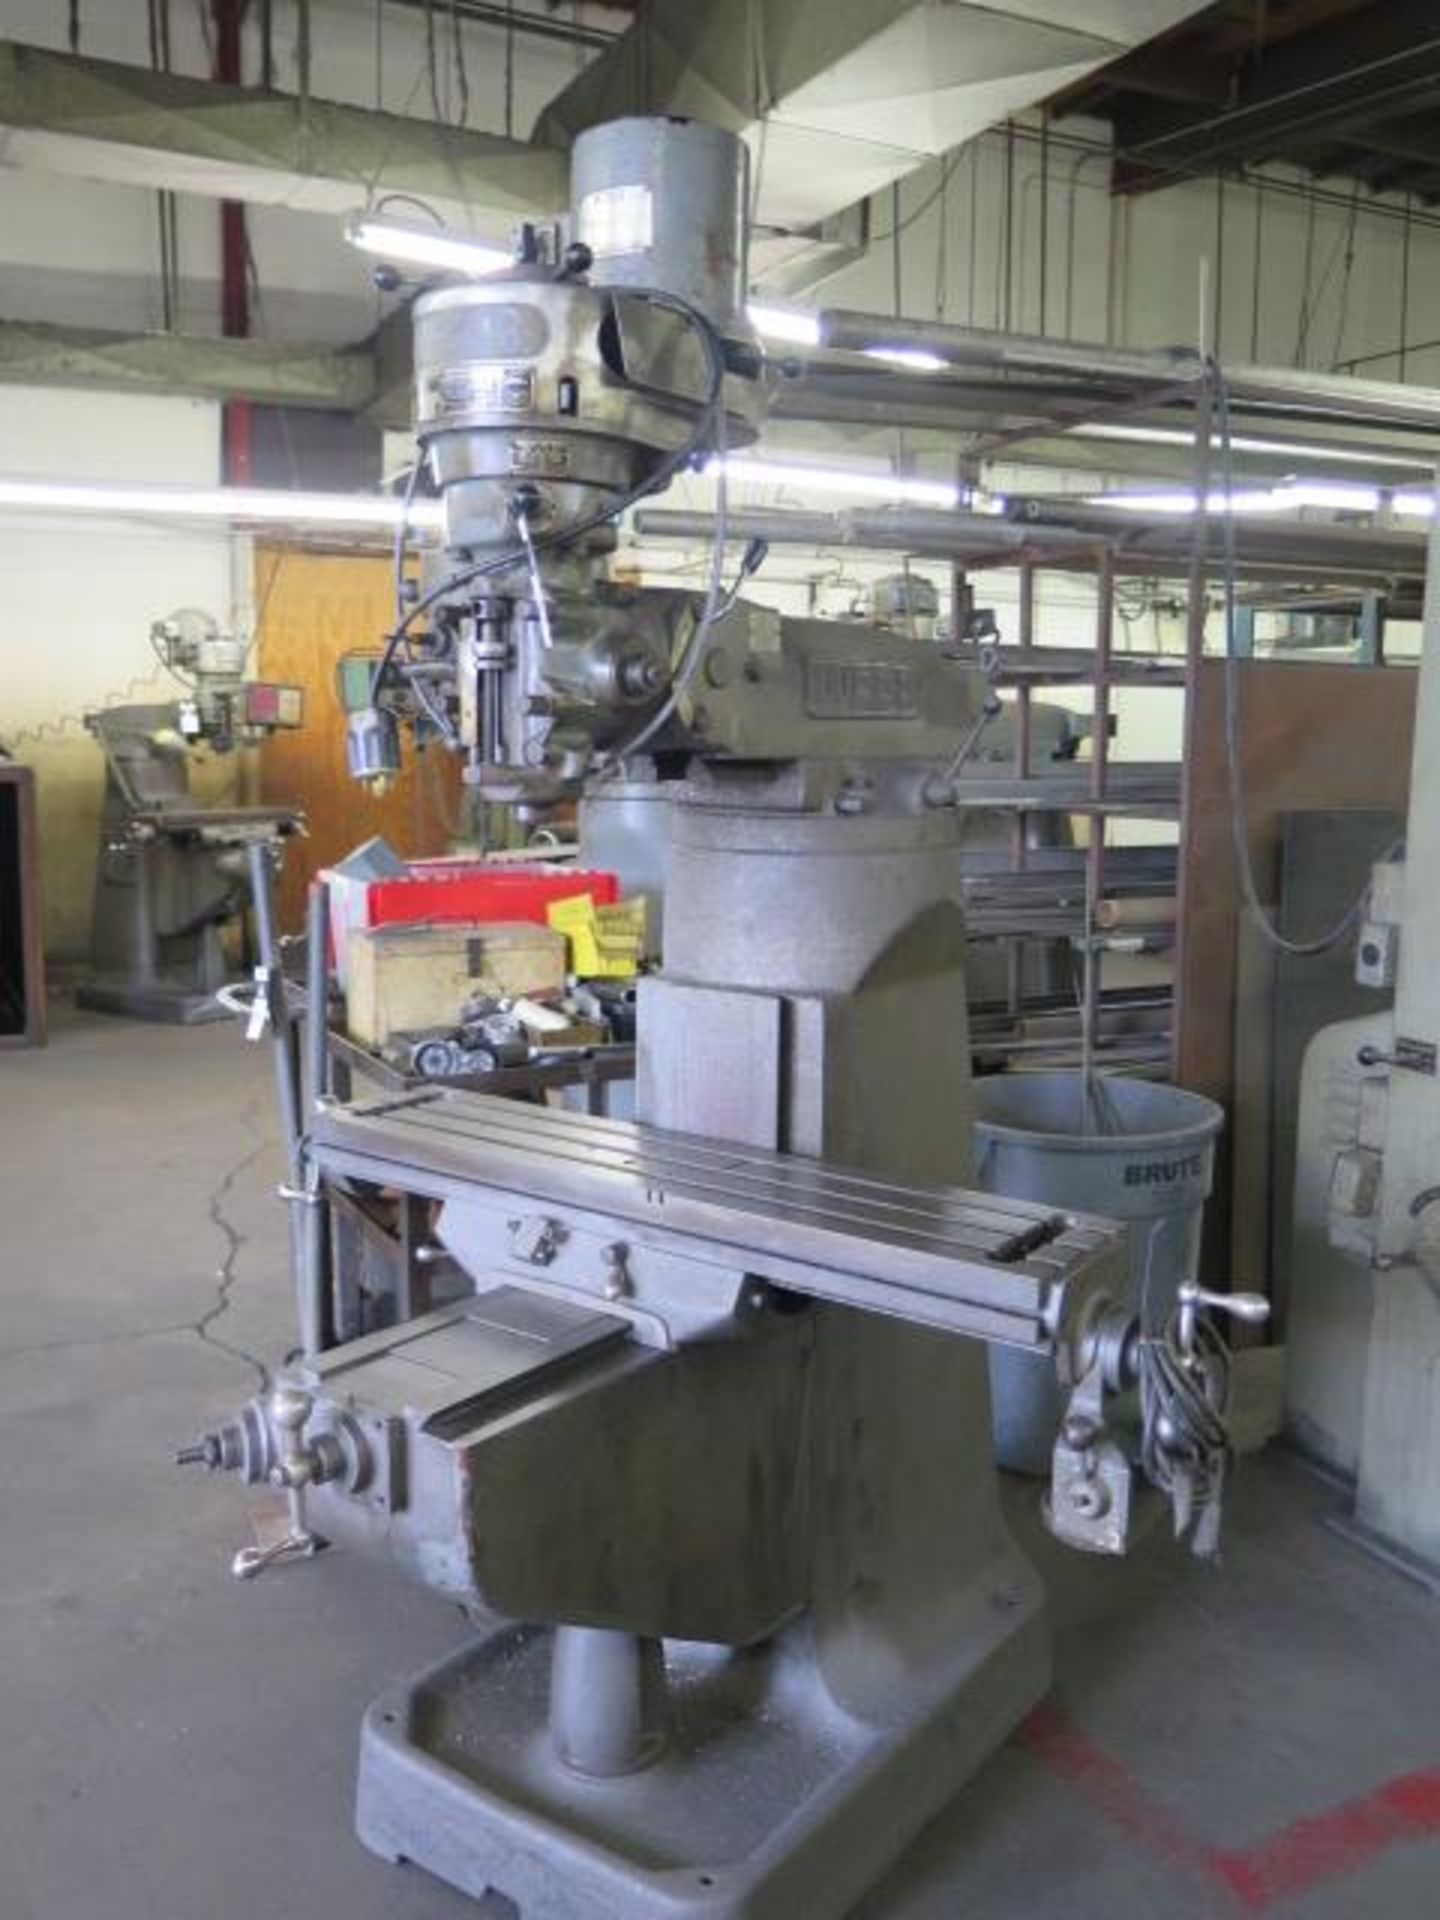 Webb Vertical Mill w/ 1Hp Motor, 80-2720 RPM, Power Feed, 9” x 47” Table (SOLD AS-IS - NO WARRANTY) - Image 2 of 7